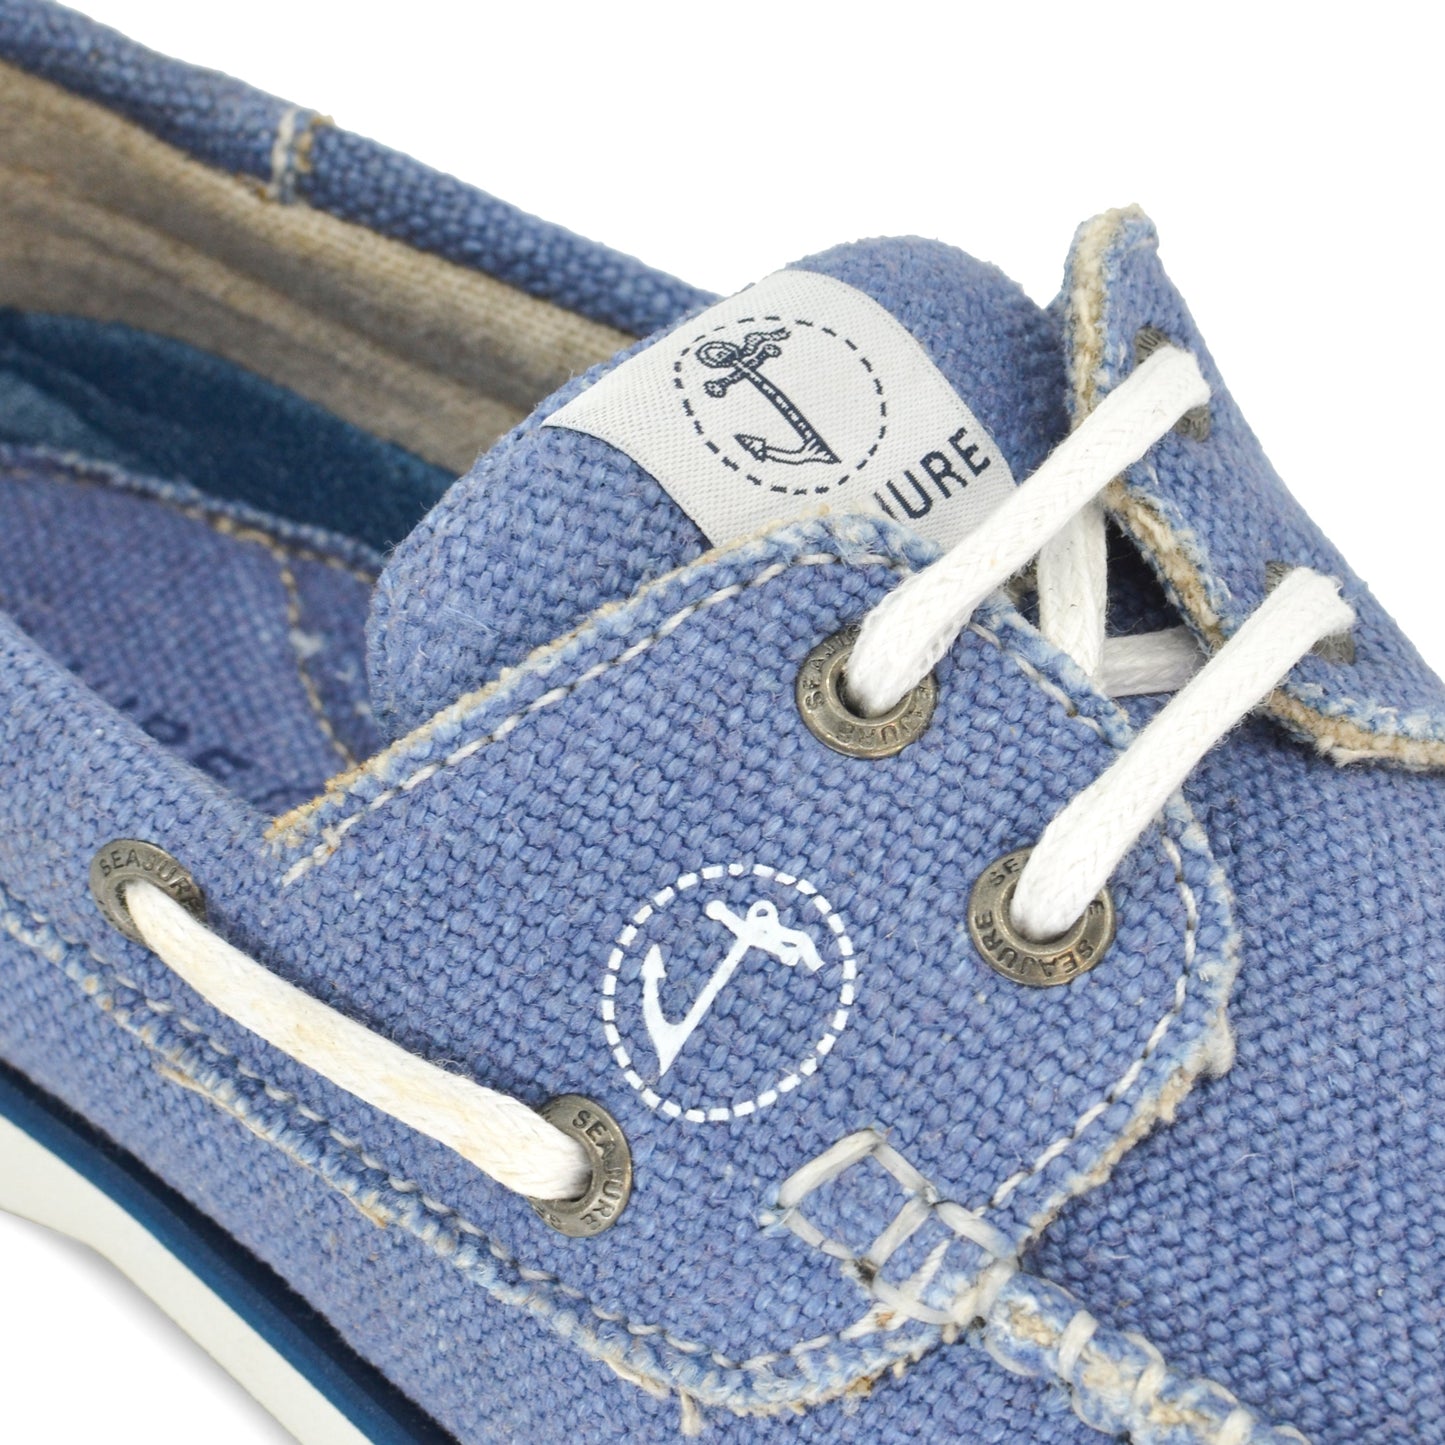 Close-up of a pair of worn Men Hemp & Vegan Boat Shoe Fidden sneakers by Amethyst Hestia with white laces and natural rubber eyelets, displaying visible signs of wear and fading.